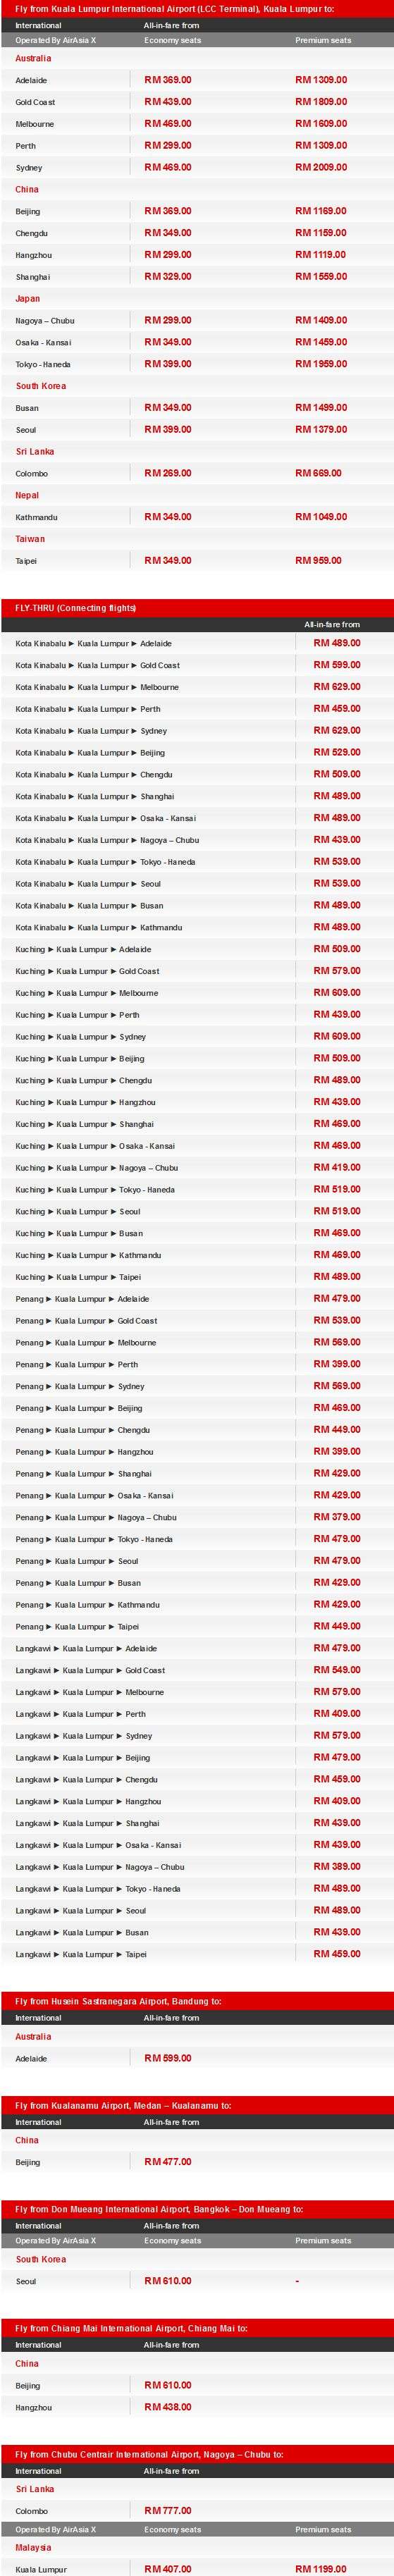 AirAsia X More Low Fare Options (Fly Now) Promotion